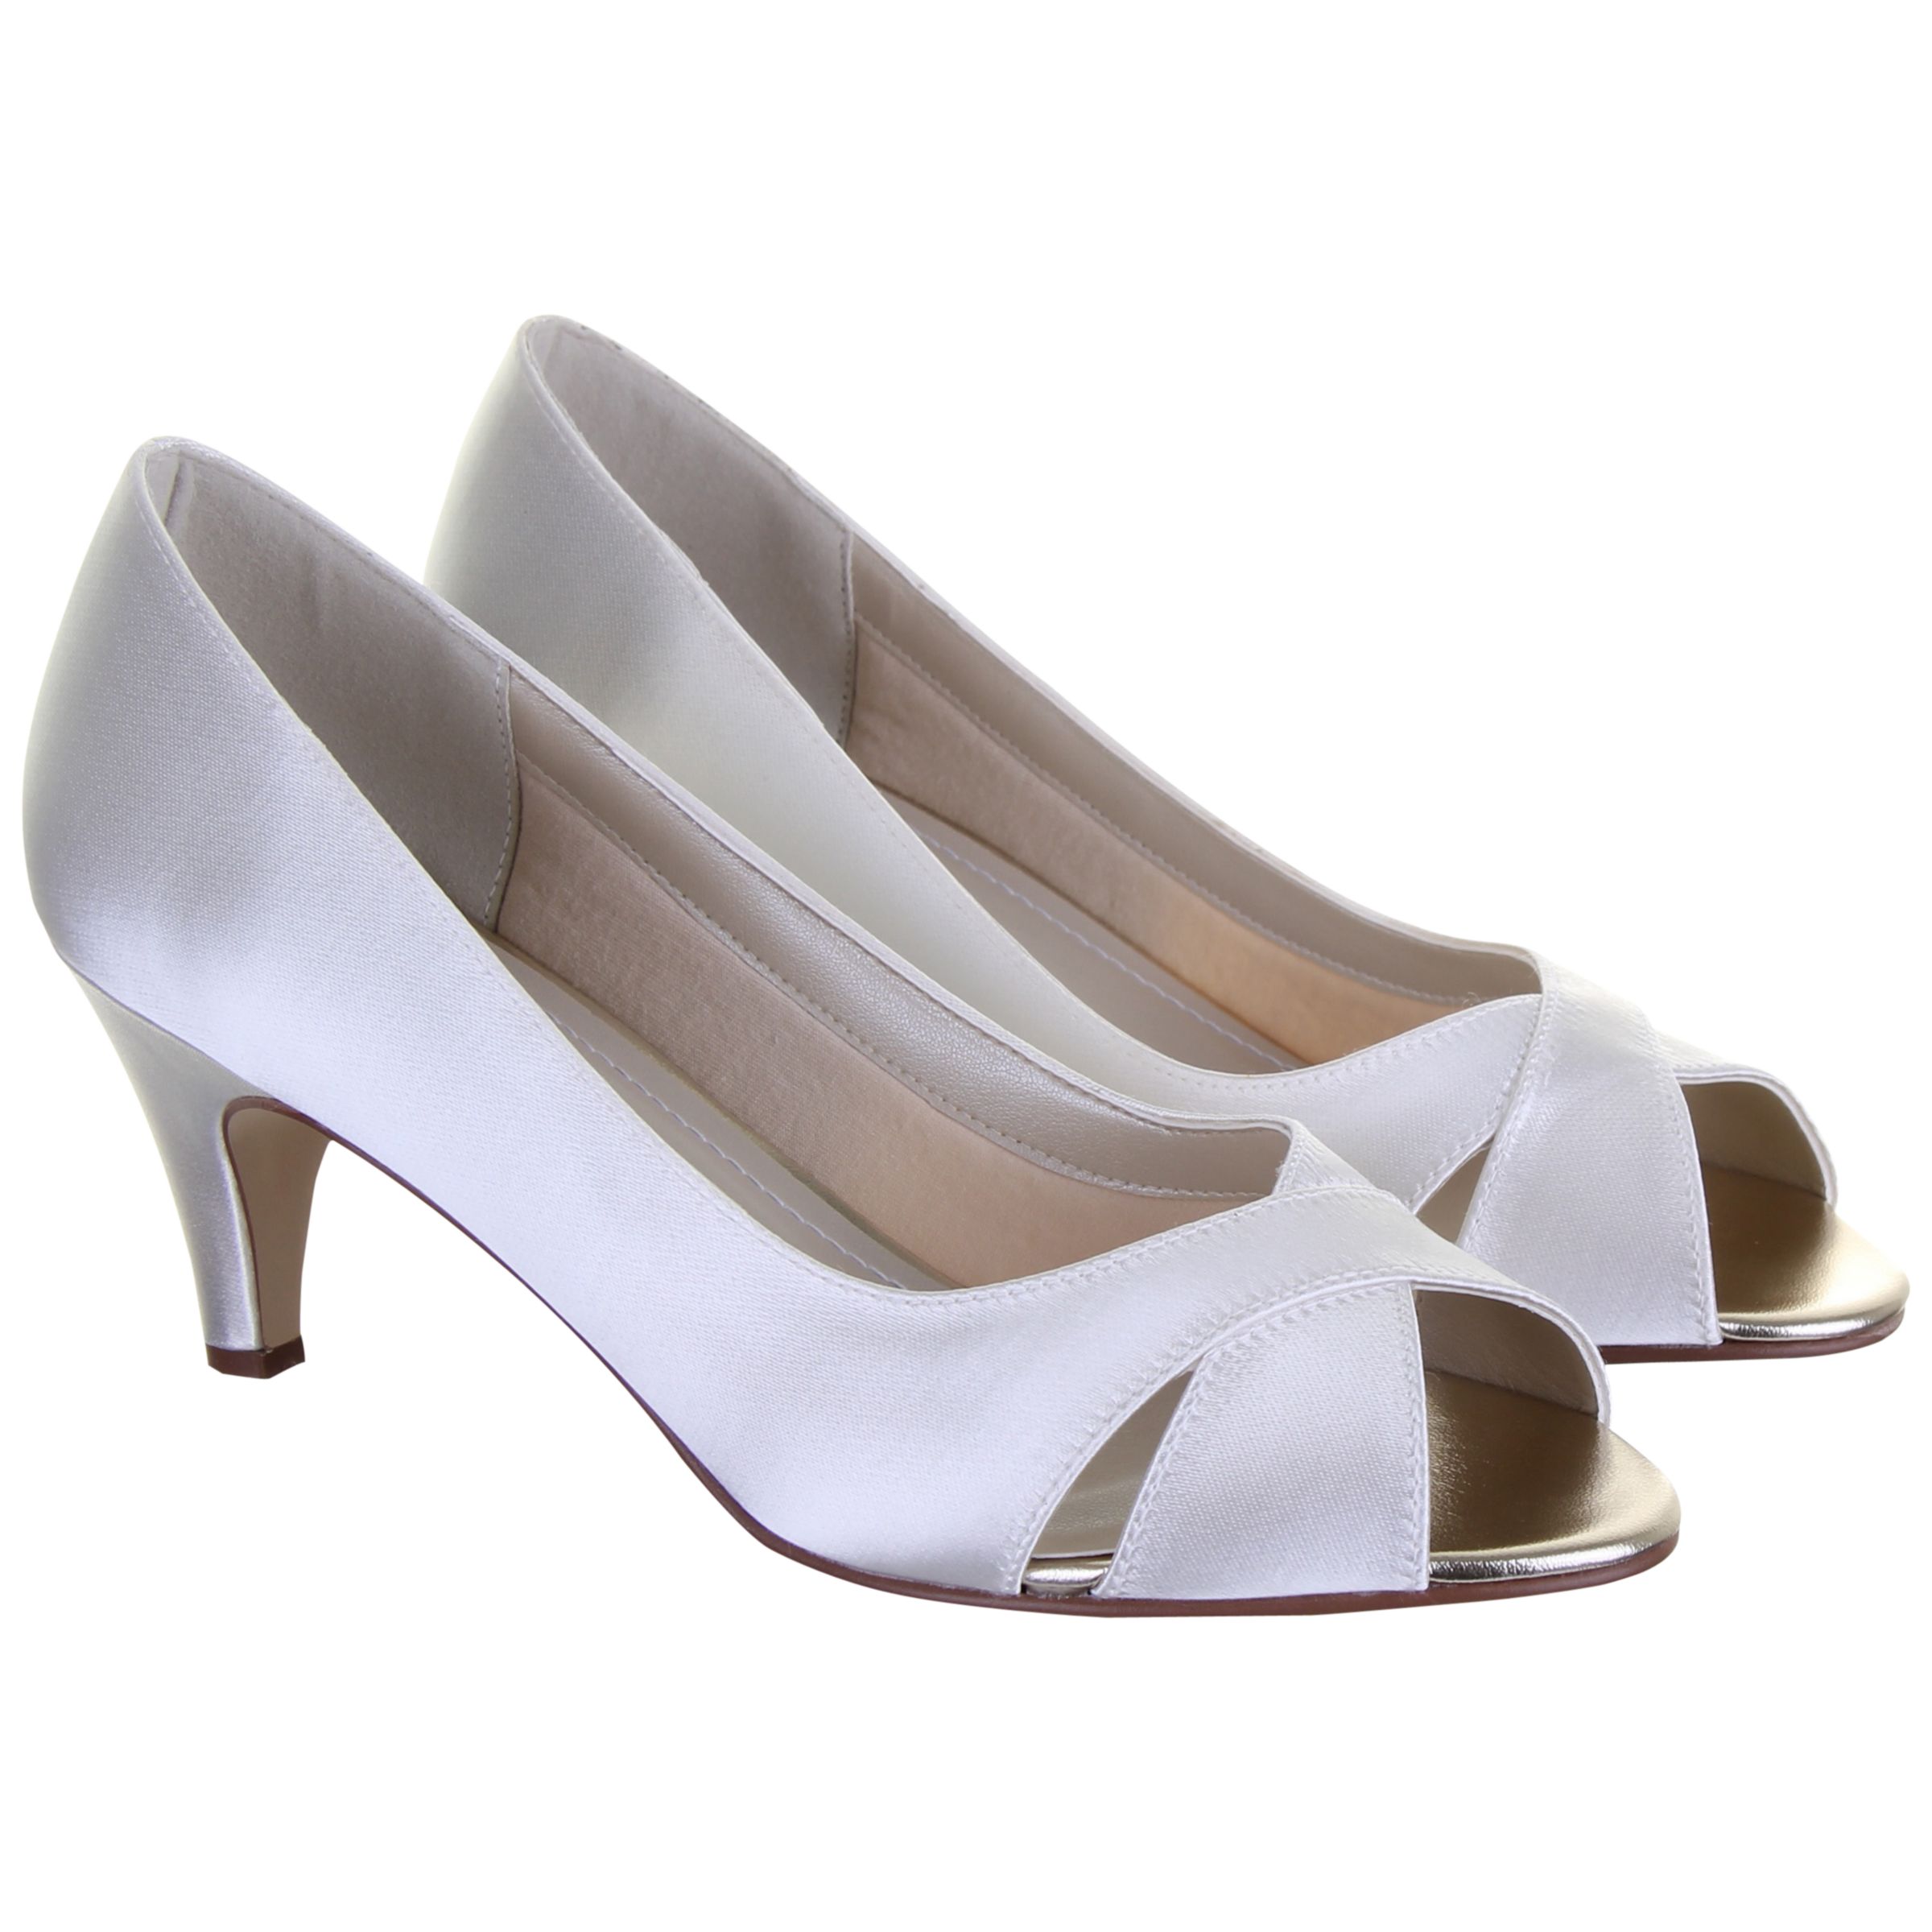 Buy Rainbow Club Evie Kitten Heel Court Shoes, Ivory Online at ...